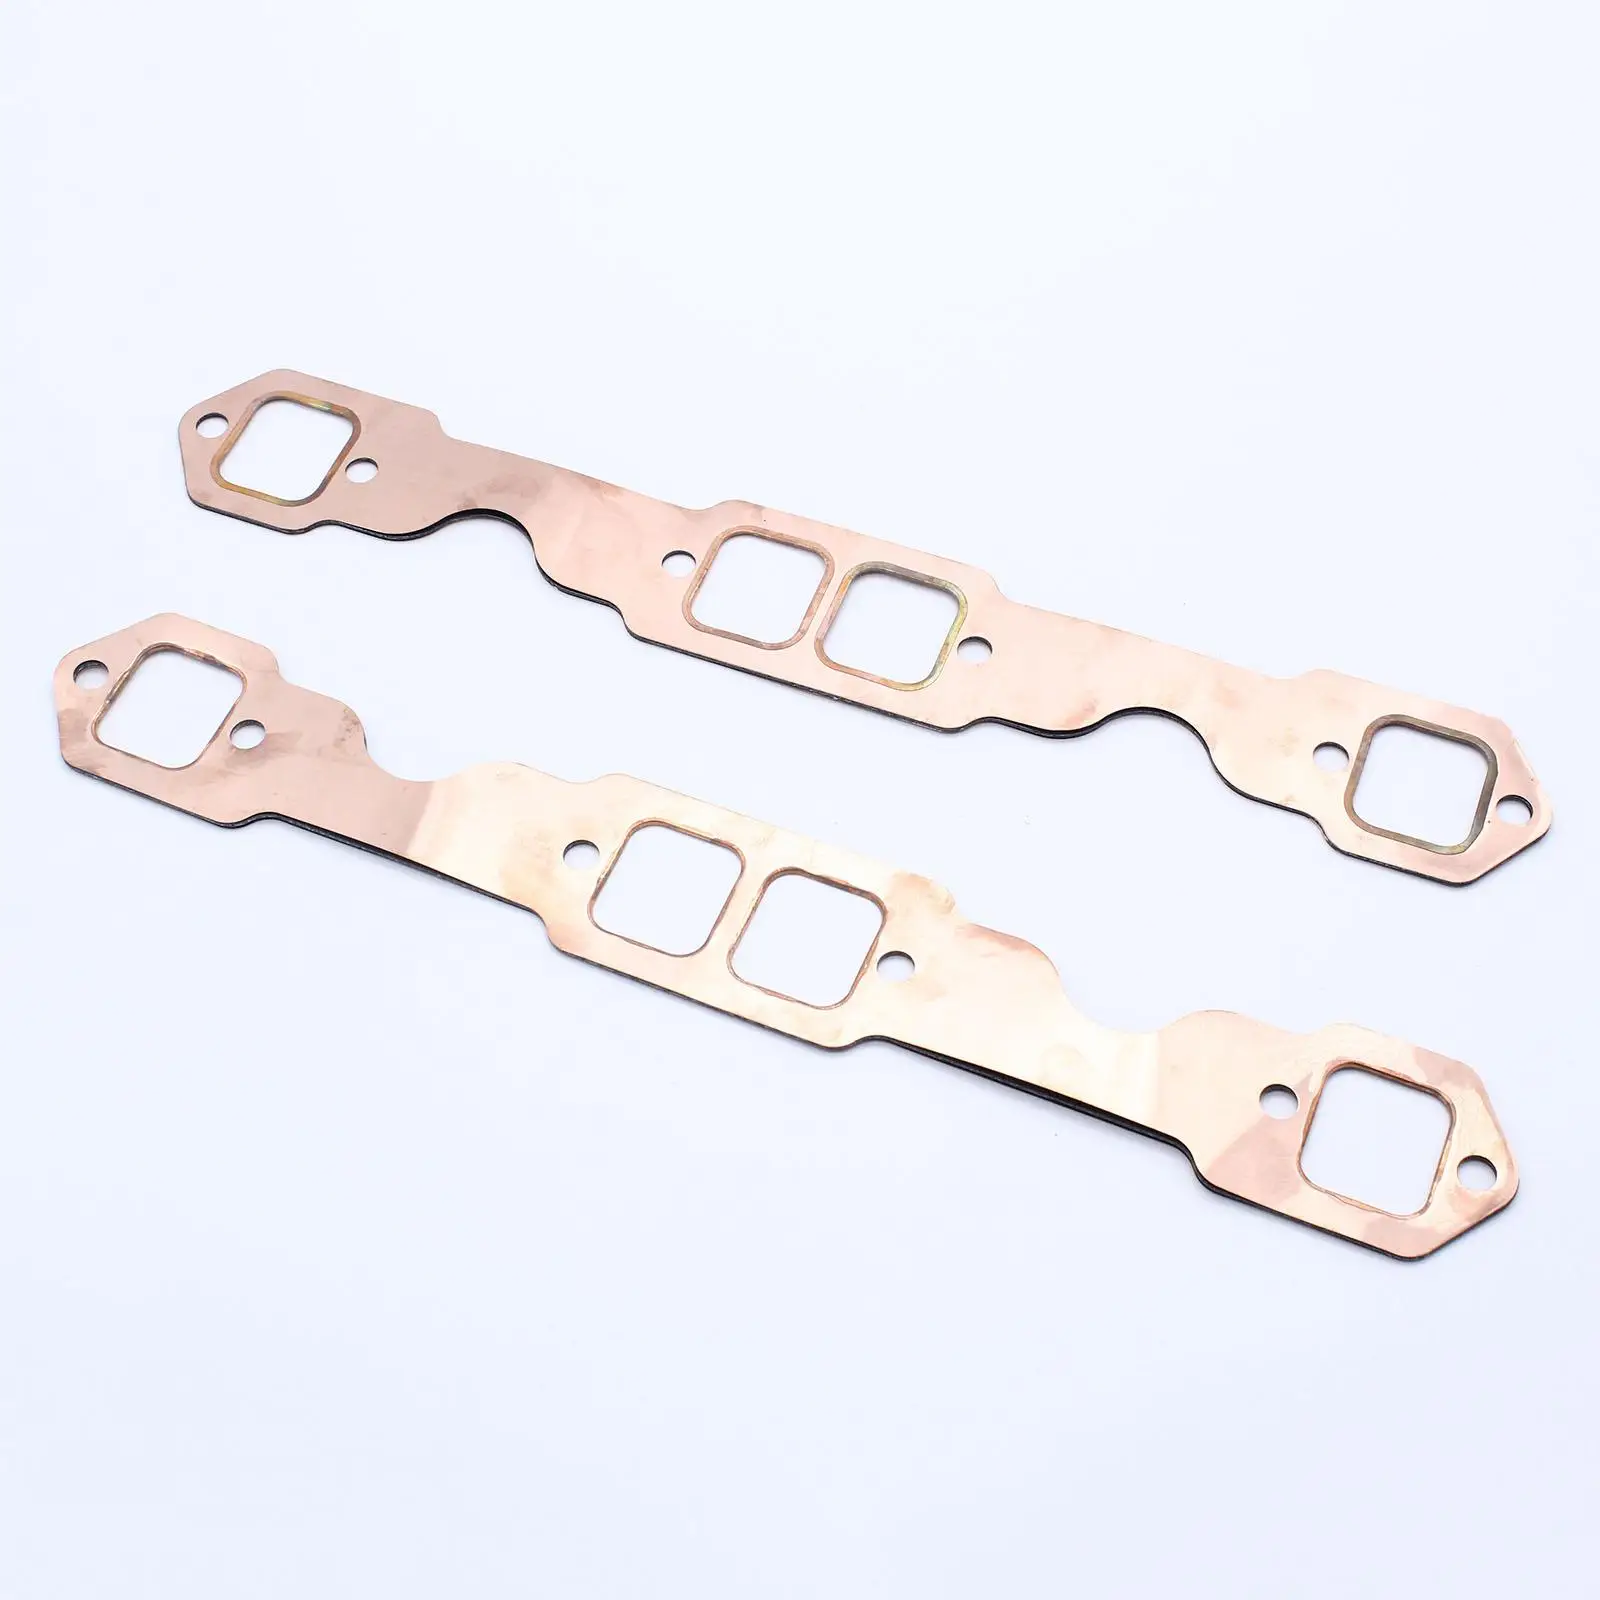 2x SBC Copper Head Exhaust Gasket Seal for 327 305 350 383 Perfect